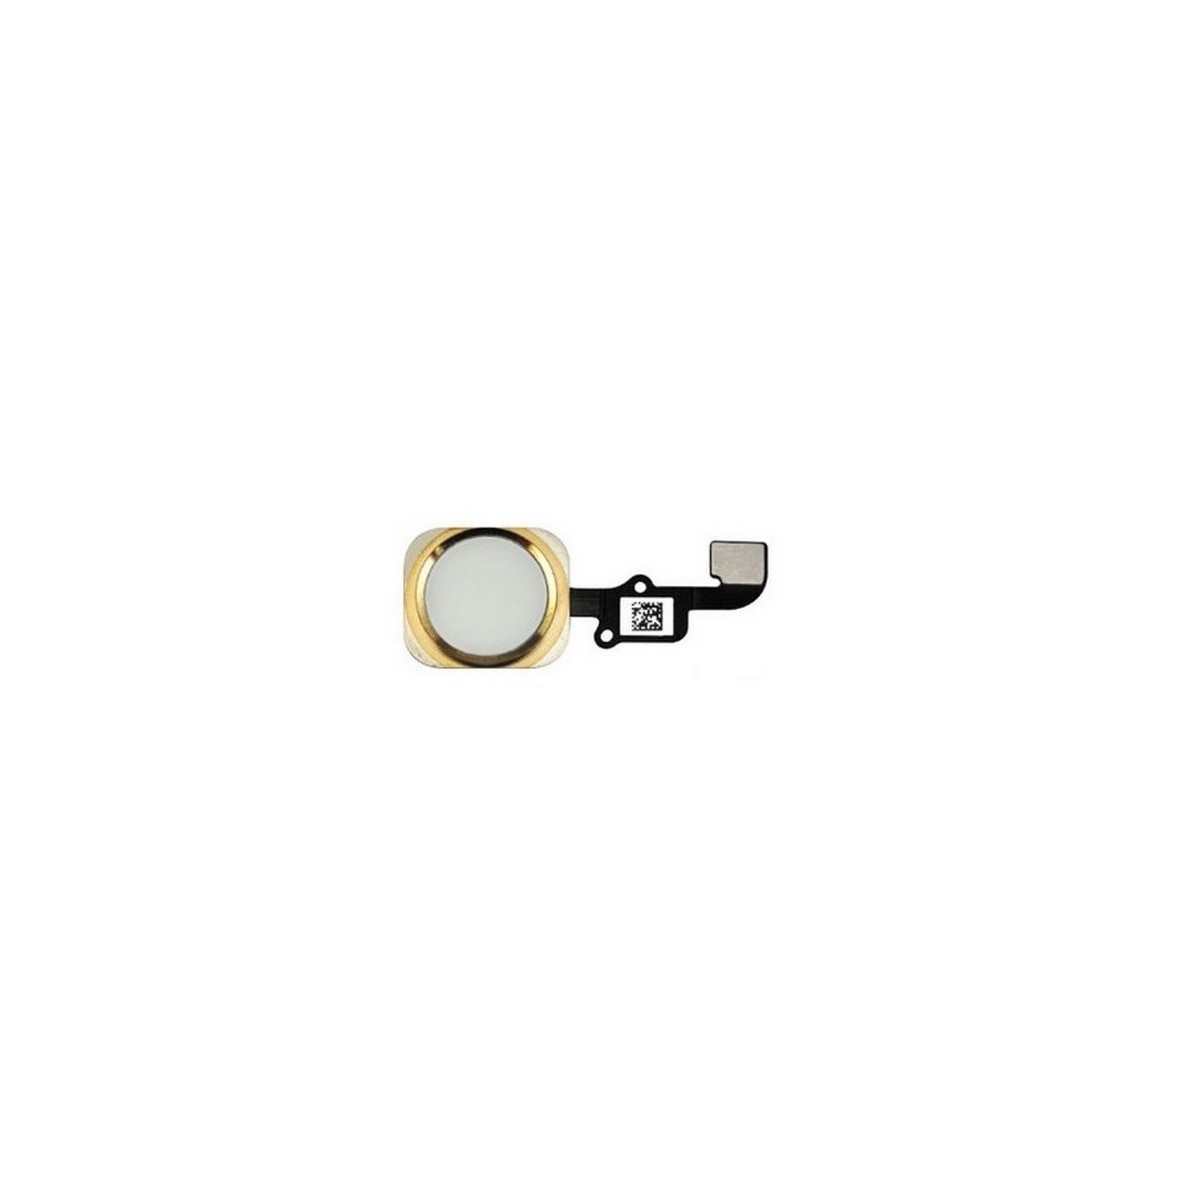 BOUTON HOME + NAPPE POUR IPHONE 6 PLUS BLANC-OR